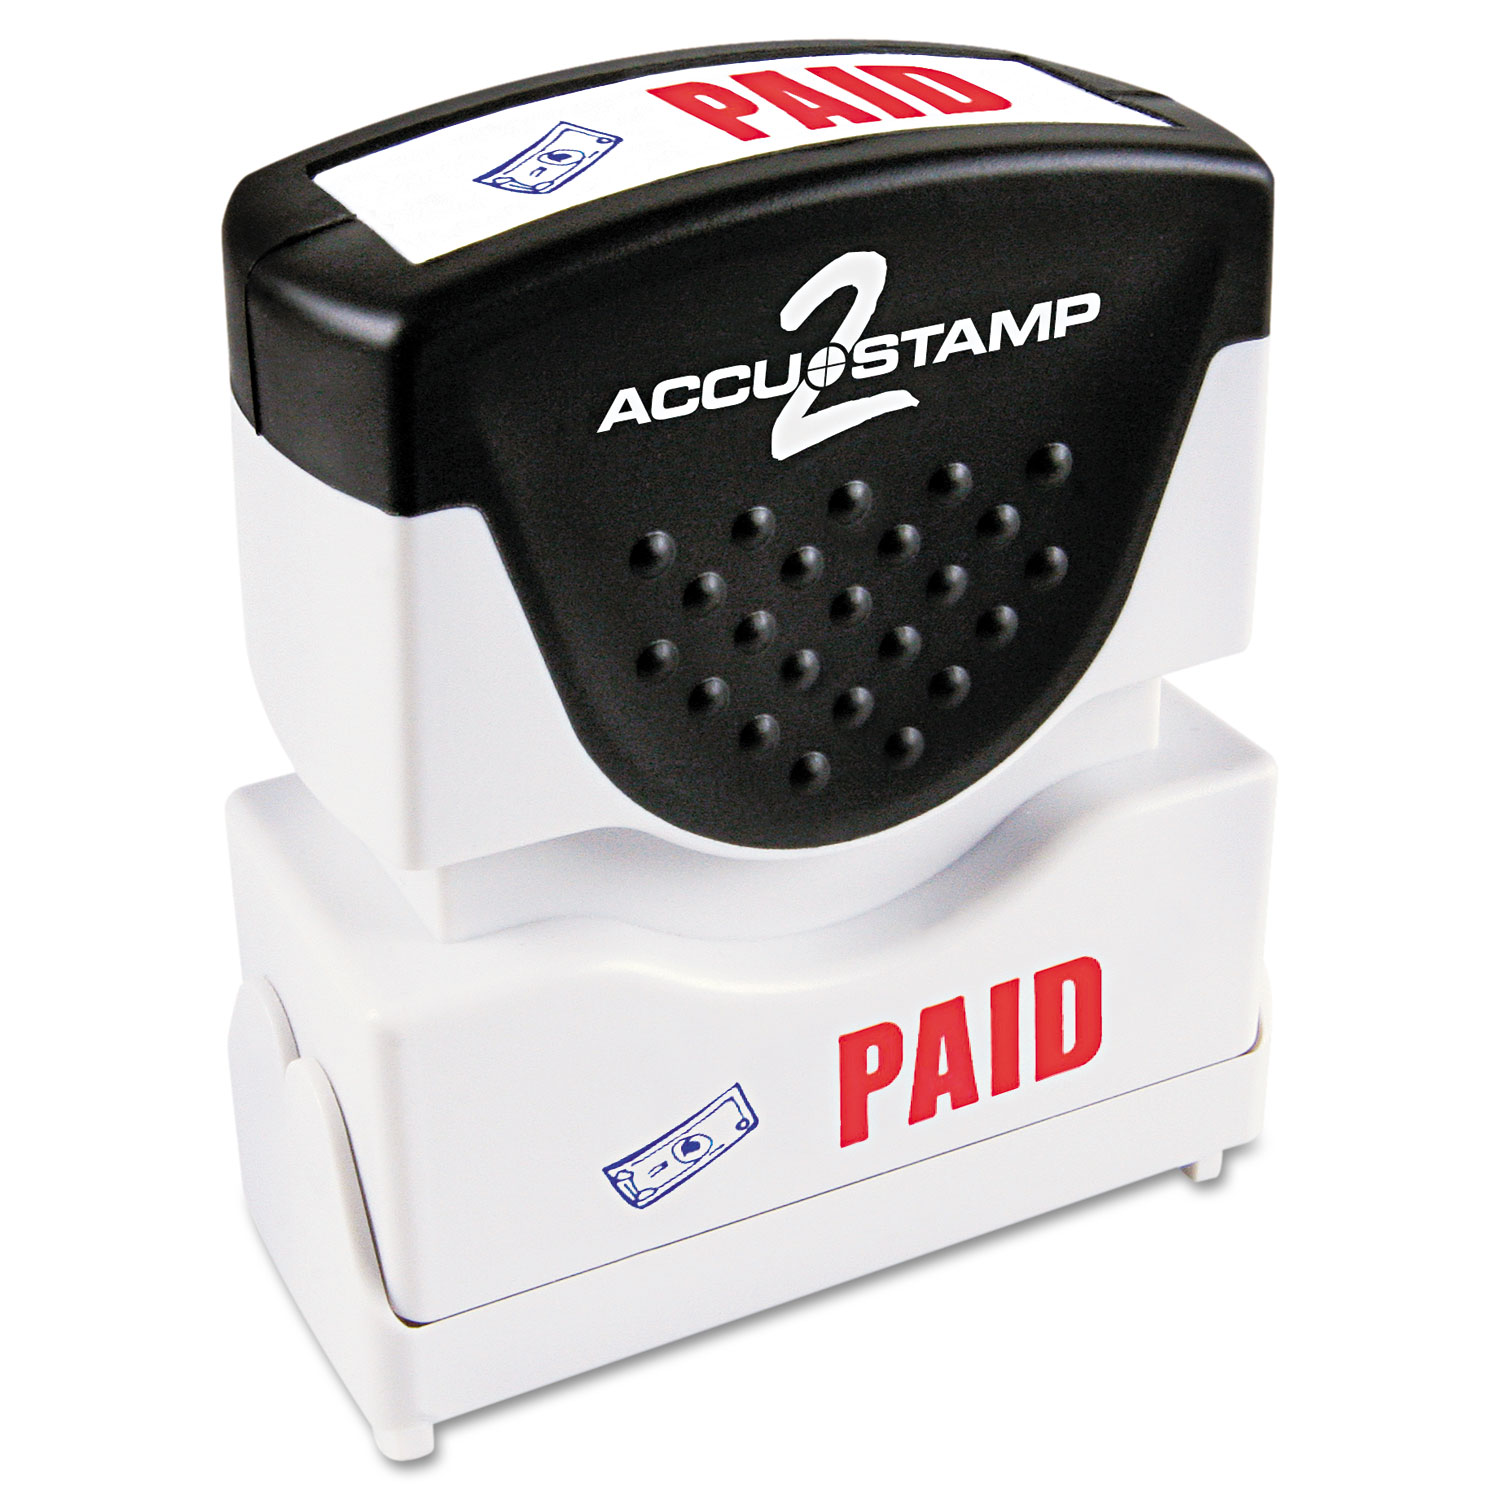  ACCUSTAMP2 035535 Pre-Inked Shutter Stamp with Microban, Red/Blue, PAID, 1 5/8 x 1/2 (COS035535) 